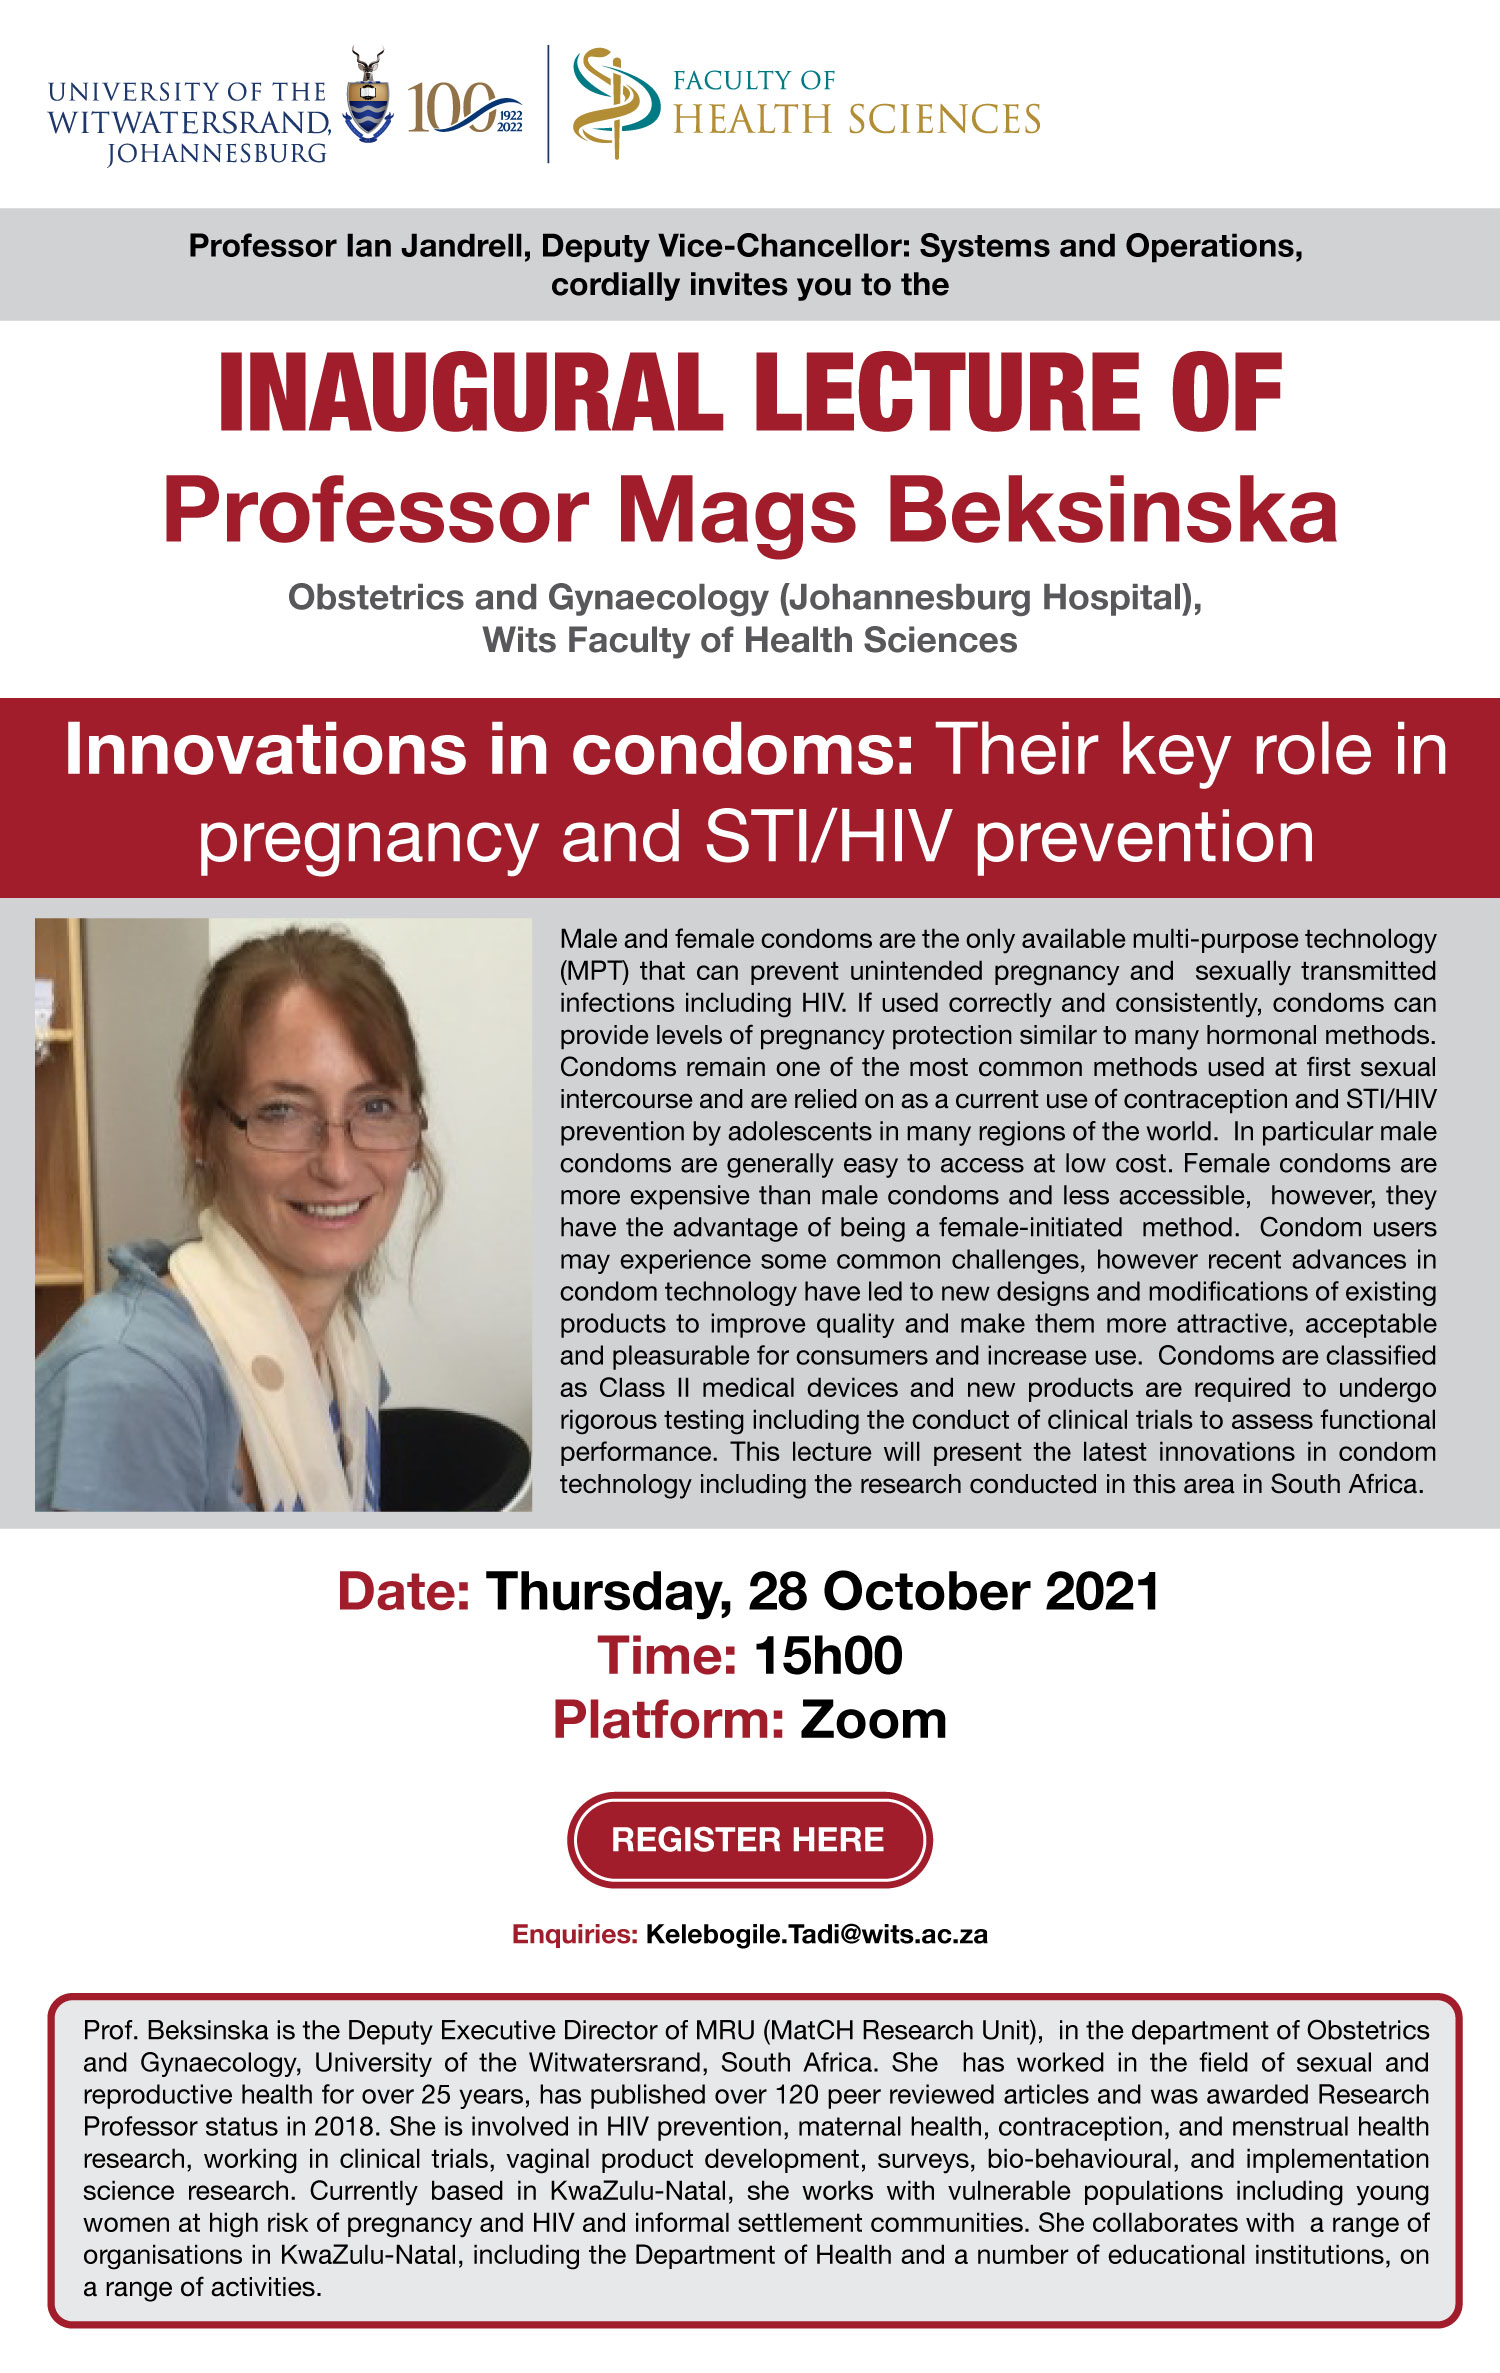 Innovations in condoms :Their key role in pregnancy and STI/HIV prevention